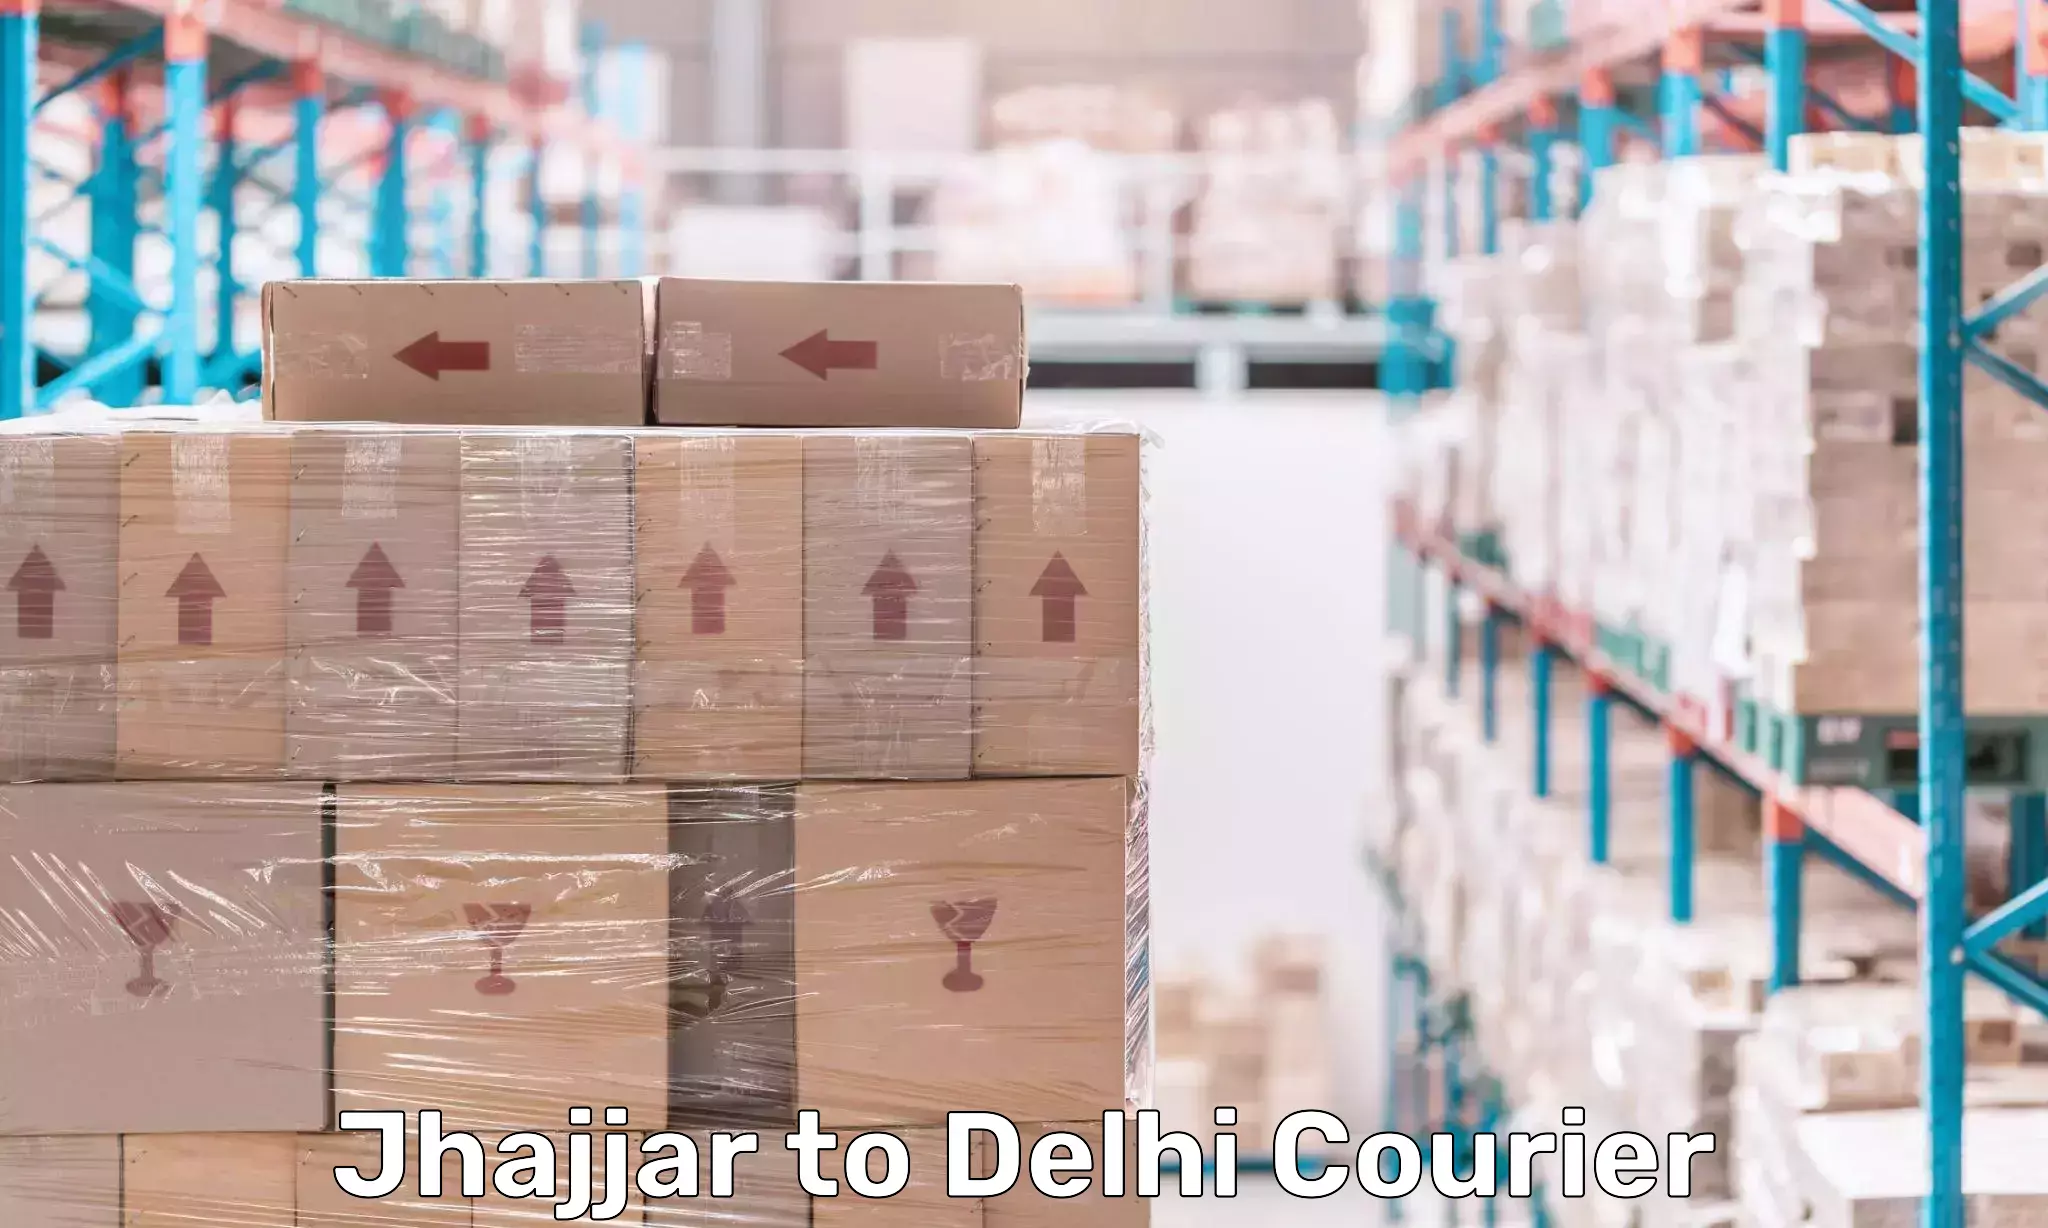 Subscription-based courier Jhajjar to NCR